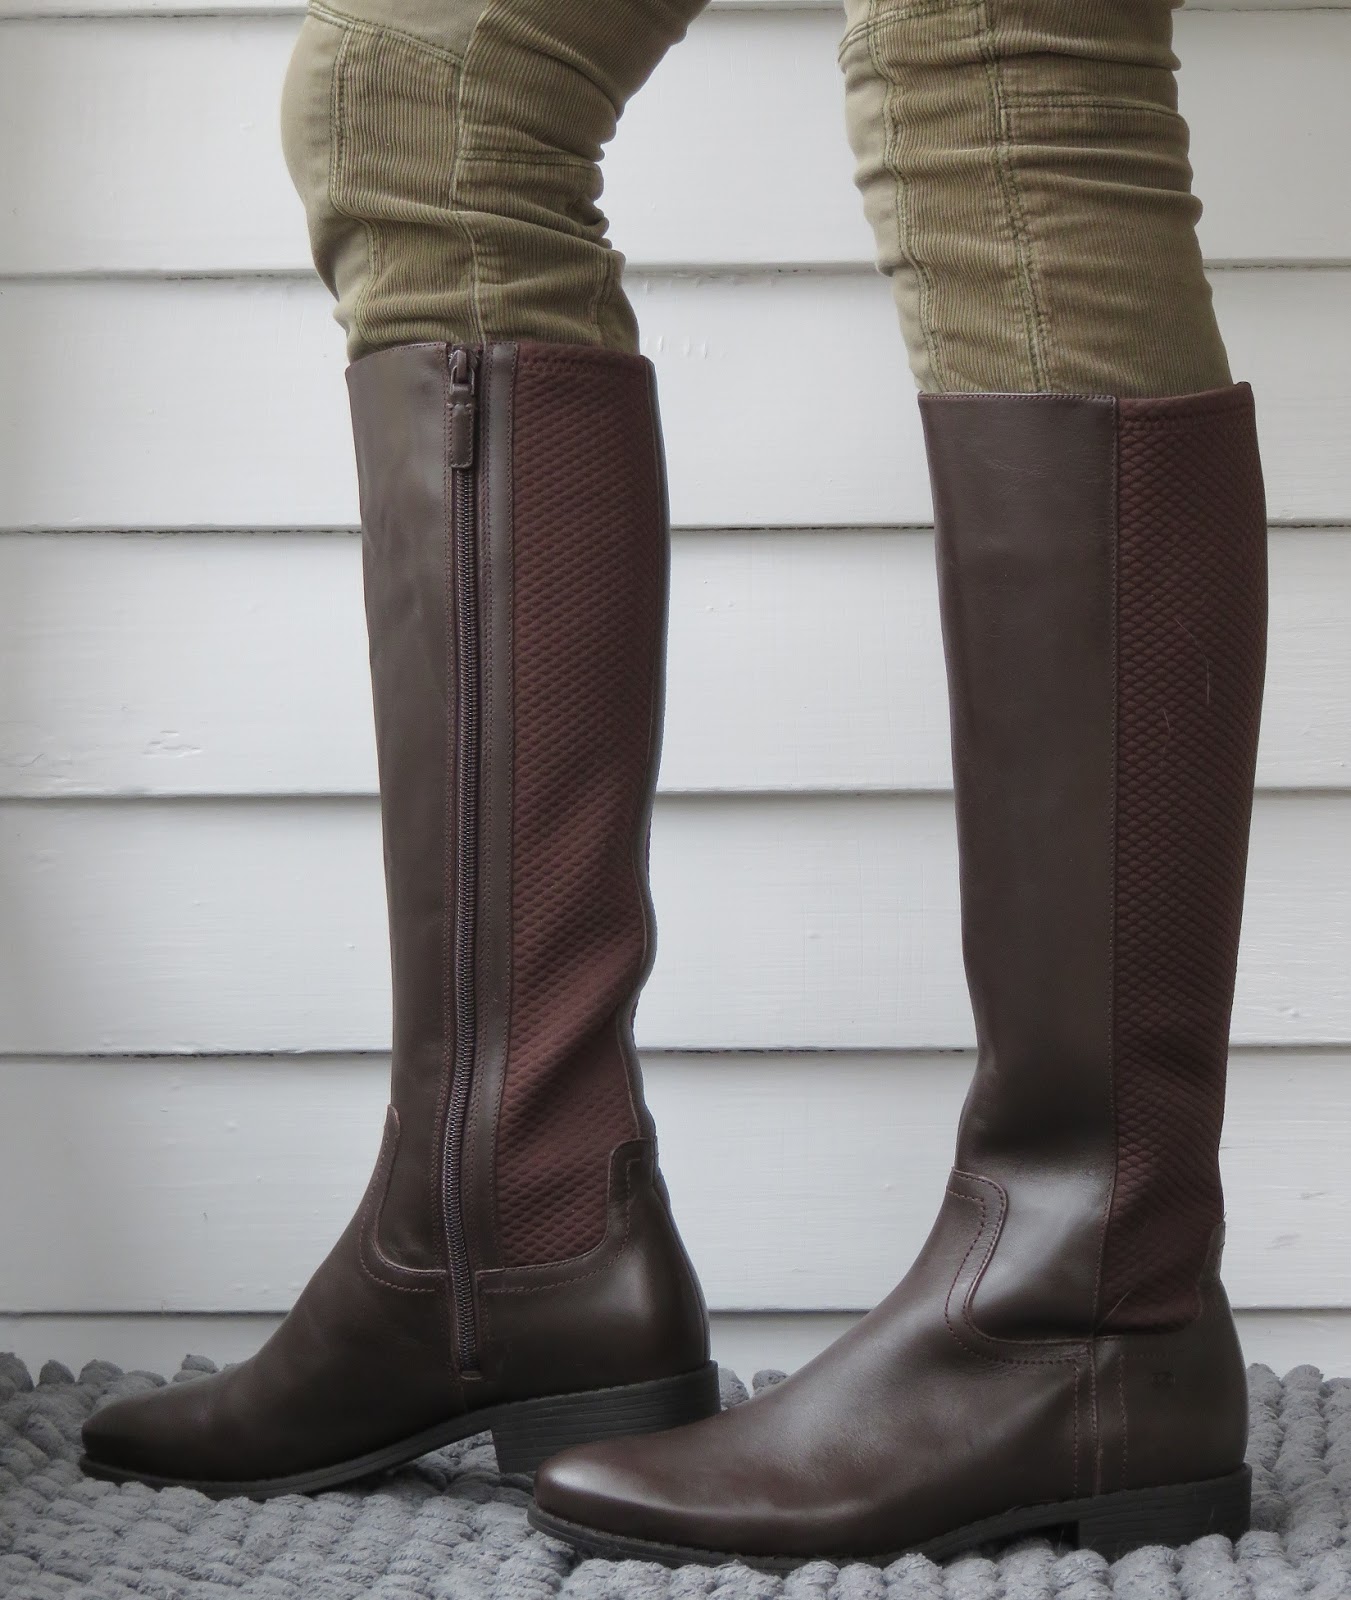 Howdy Slim! Riding Boots for Thin Calves: Cole Haan Adler